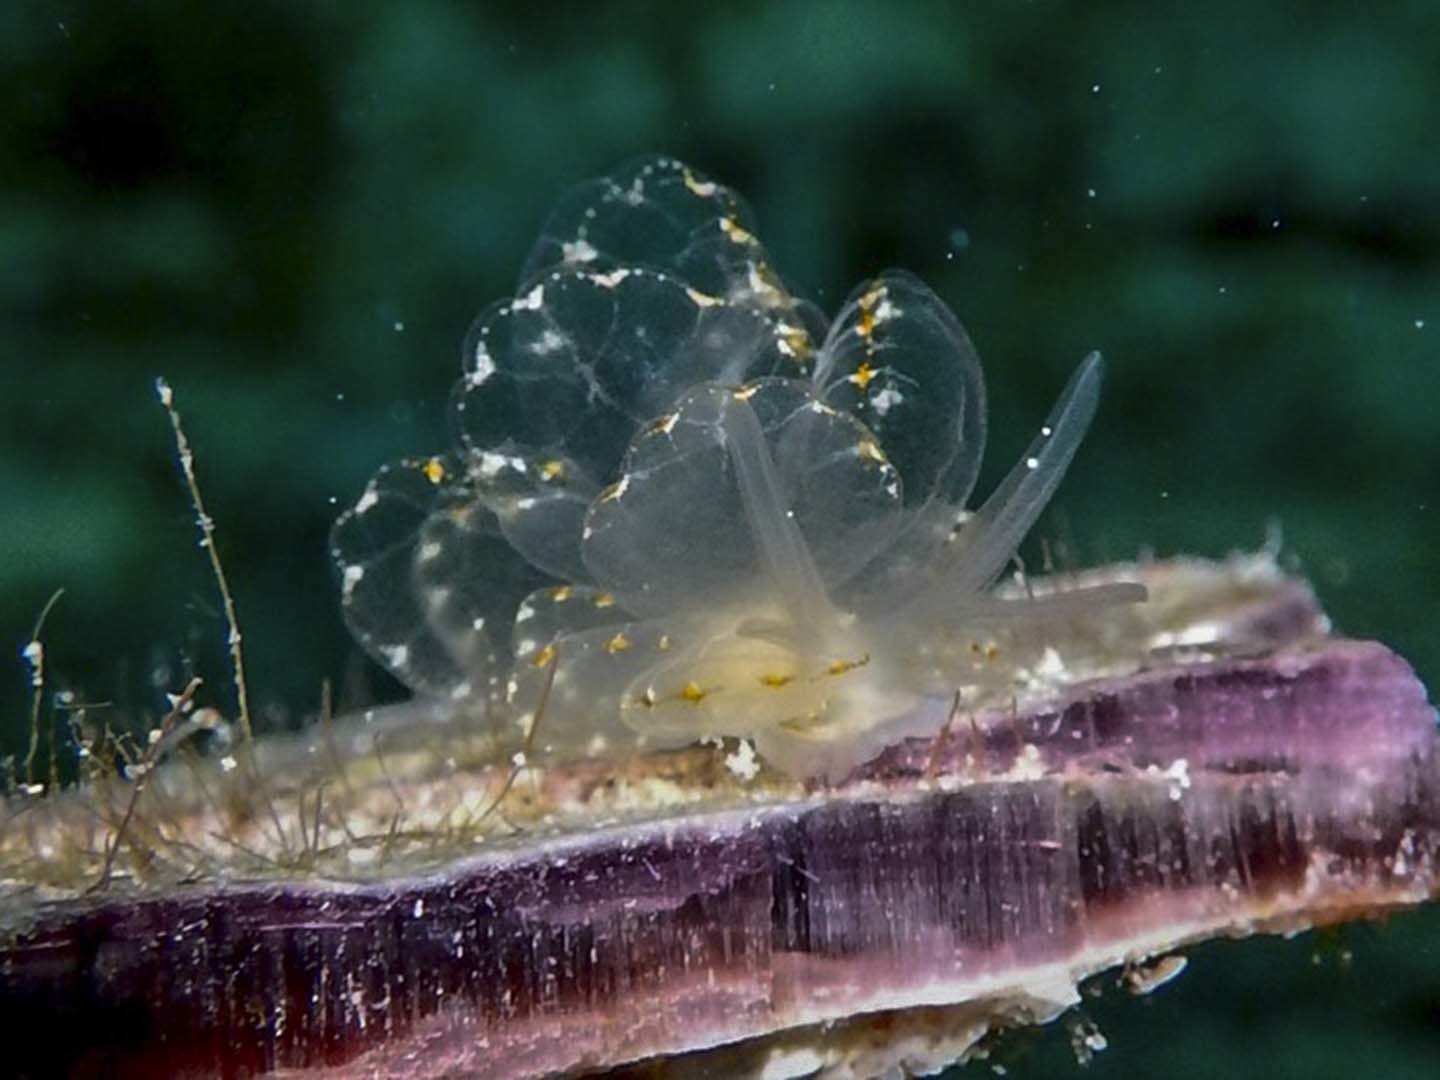 Cyerce elegans nudibranch spotted while scuba diving in Romblon, Philippines